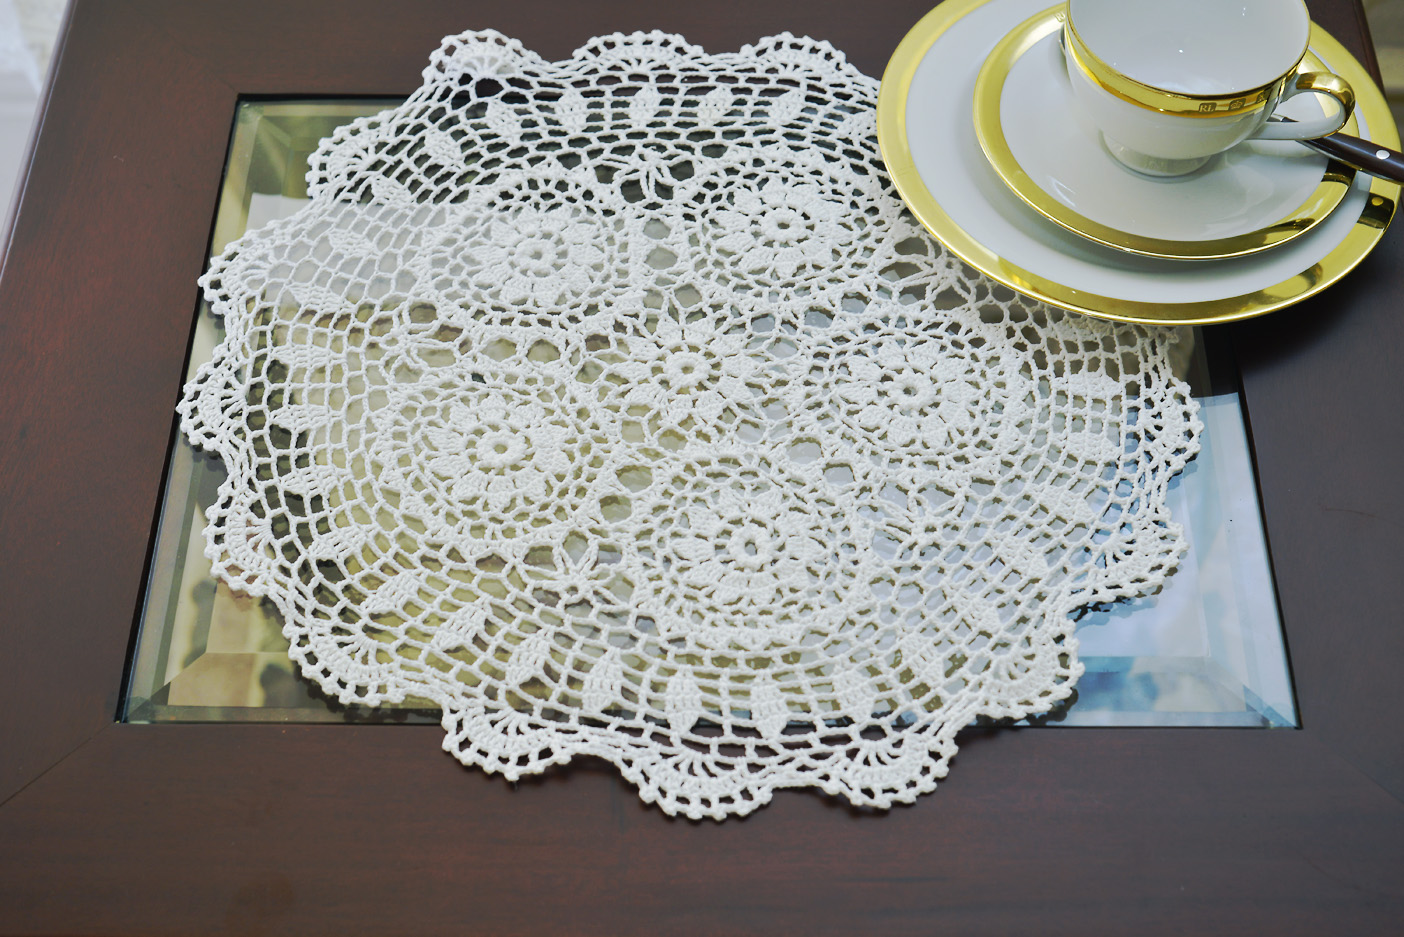 16" Round Crochet Placemat.